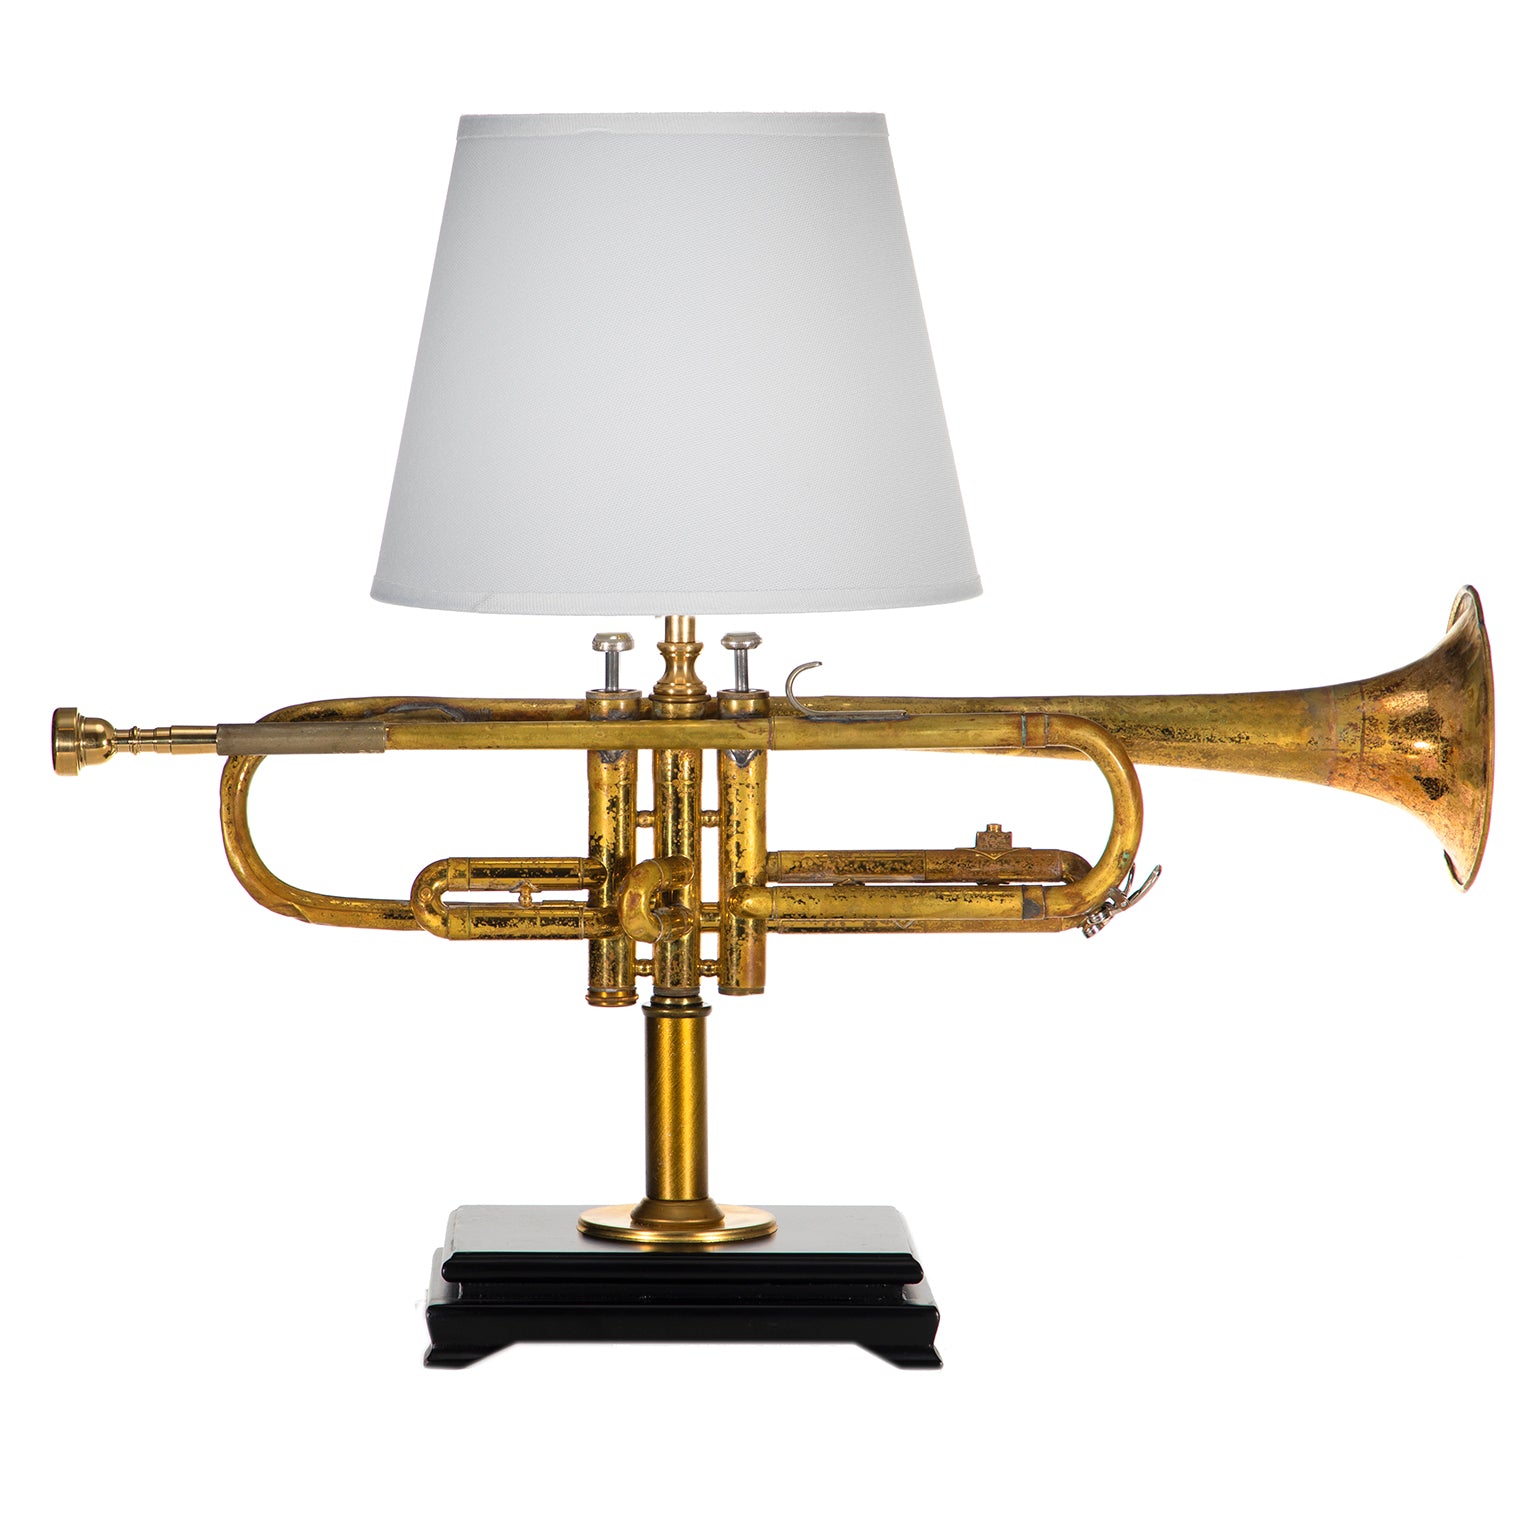 Brass Trumpet Lamp - Hand Crafted One a Kind Musical Instru